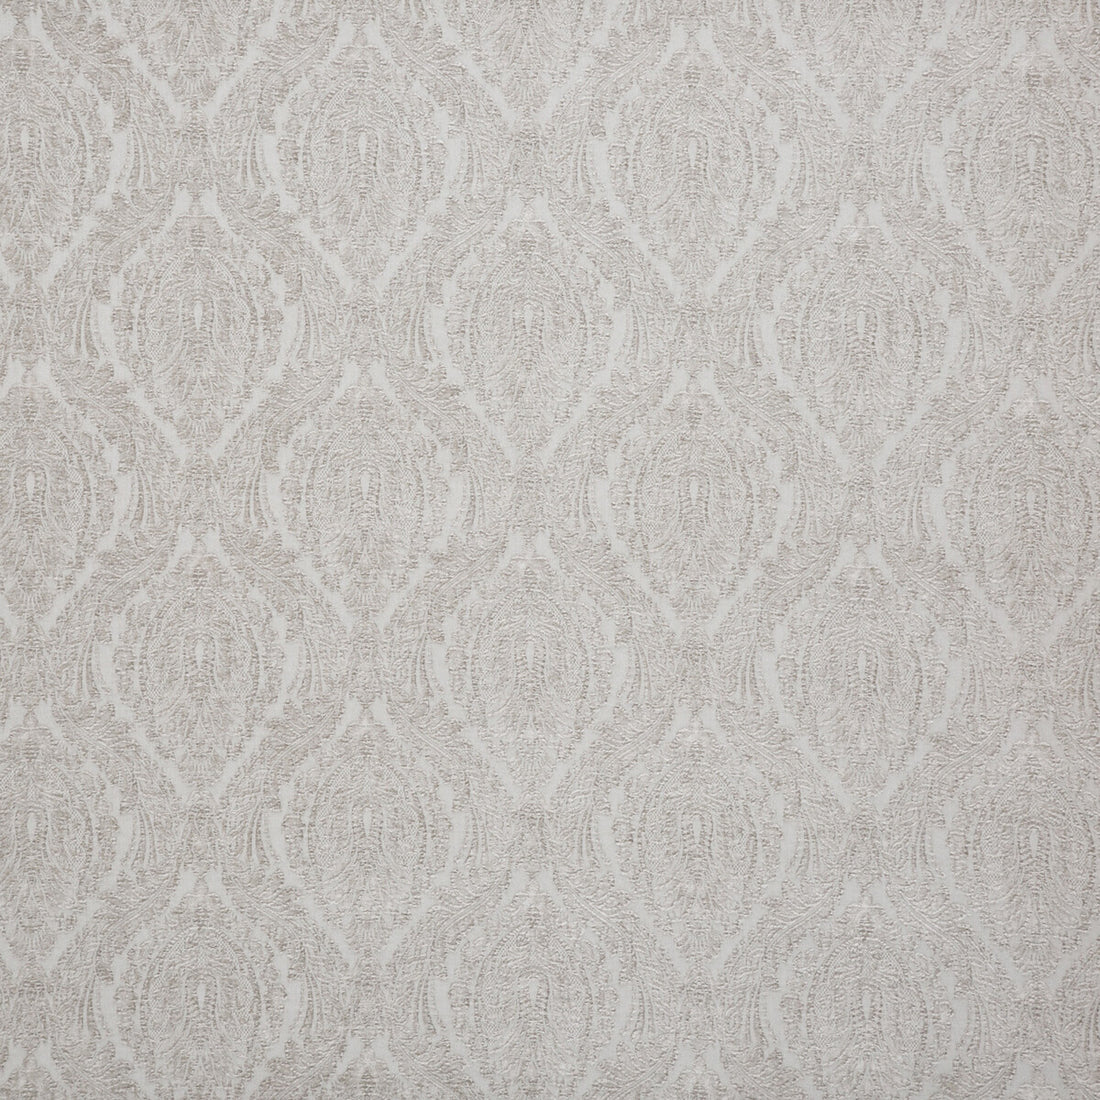 Pentire fabric in warm grey color - pattern BF10569.938.0 - by G P &amp; J Baker in the Artisan collection